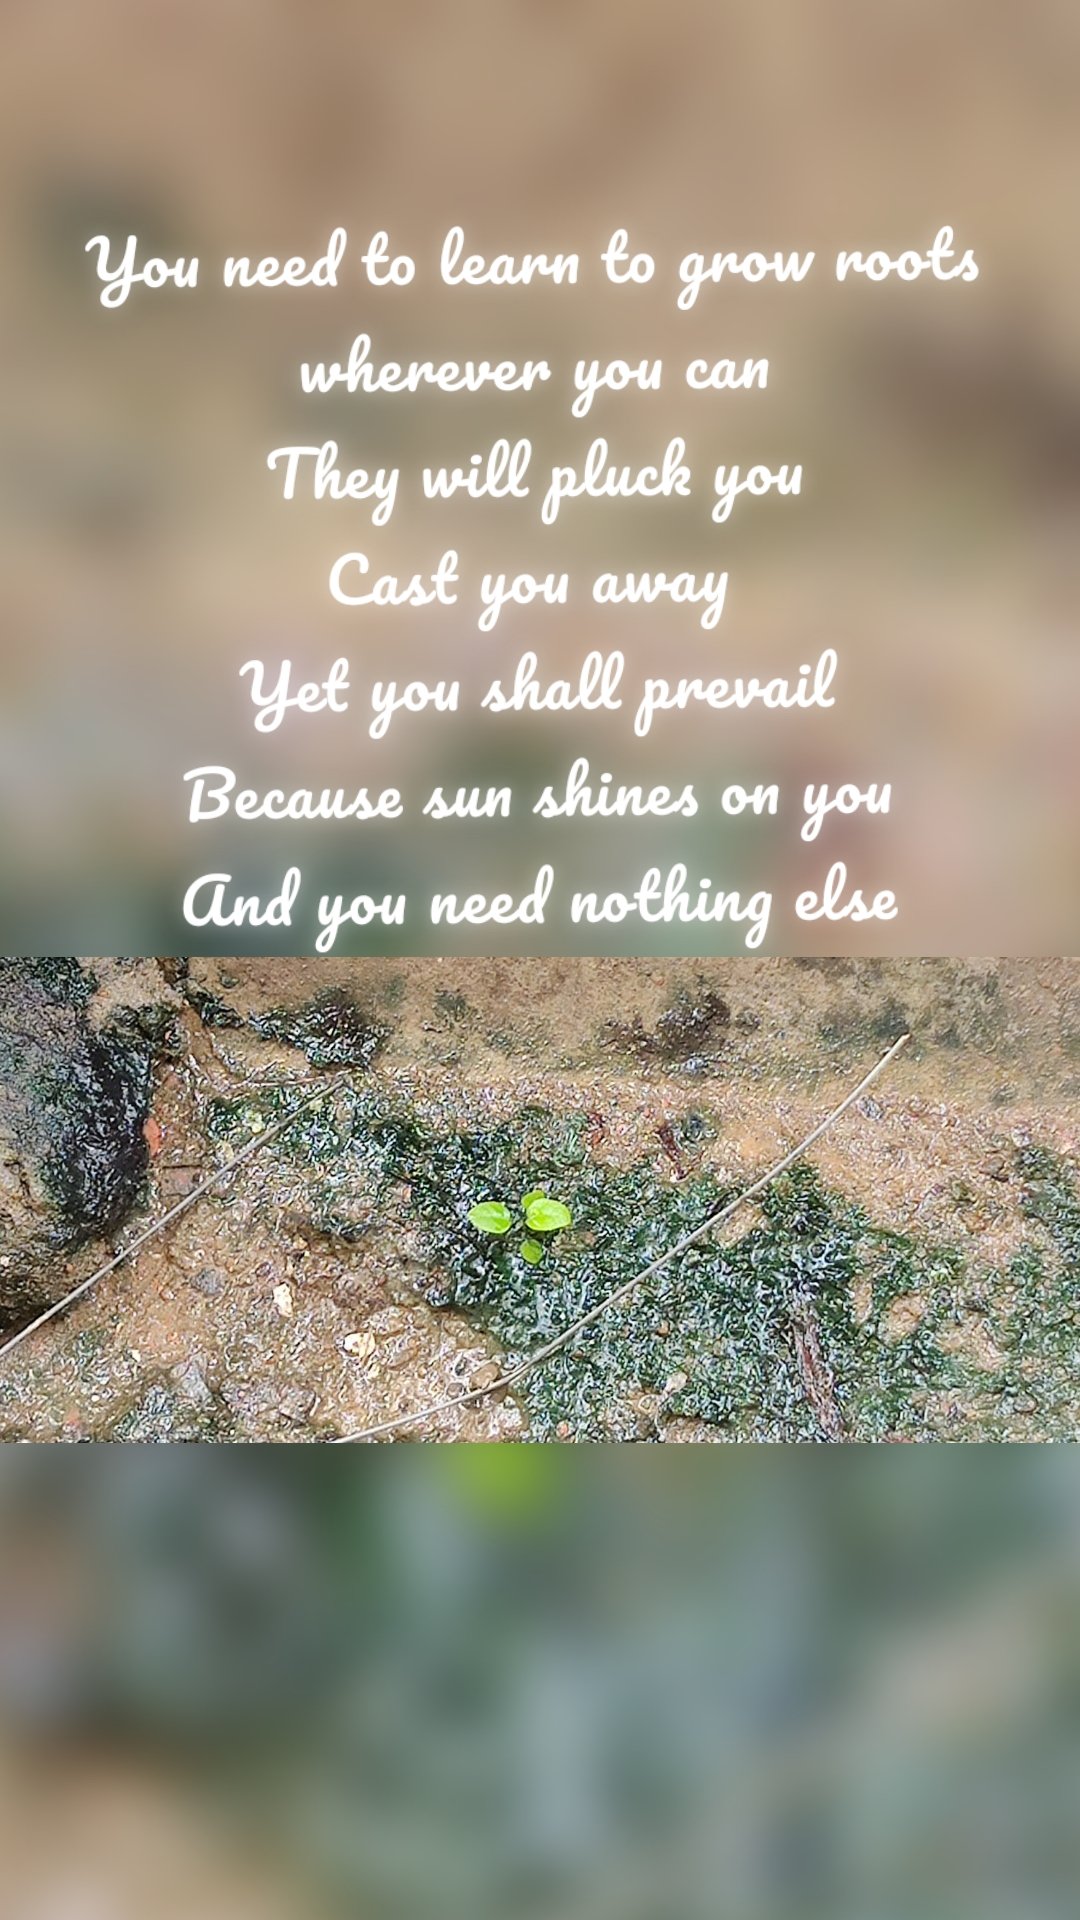 You need to learn to grow roots wherever you can
They will pluck you
Cast you away 
Yet you shall prevail
Because sun shines on you
And you need nothing else